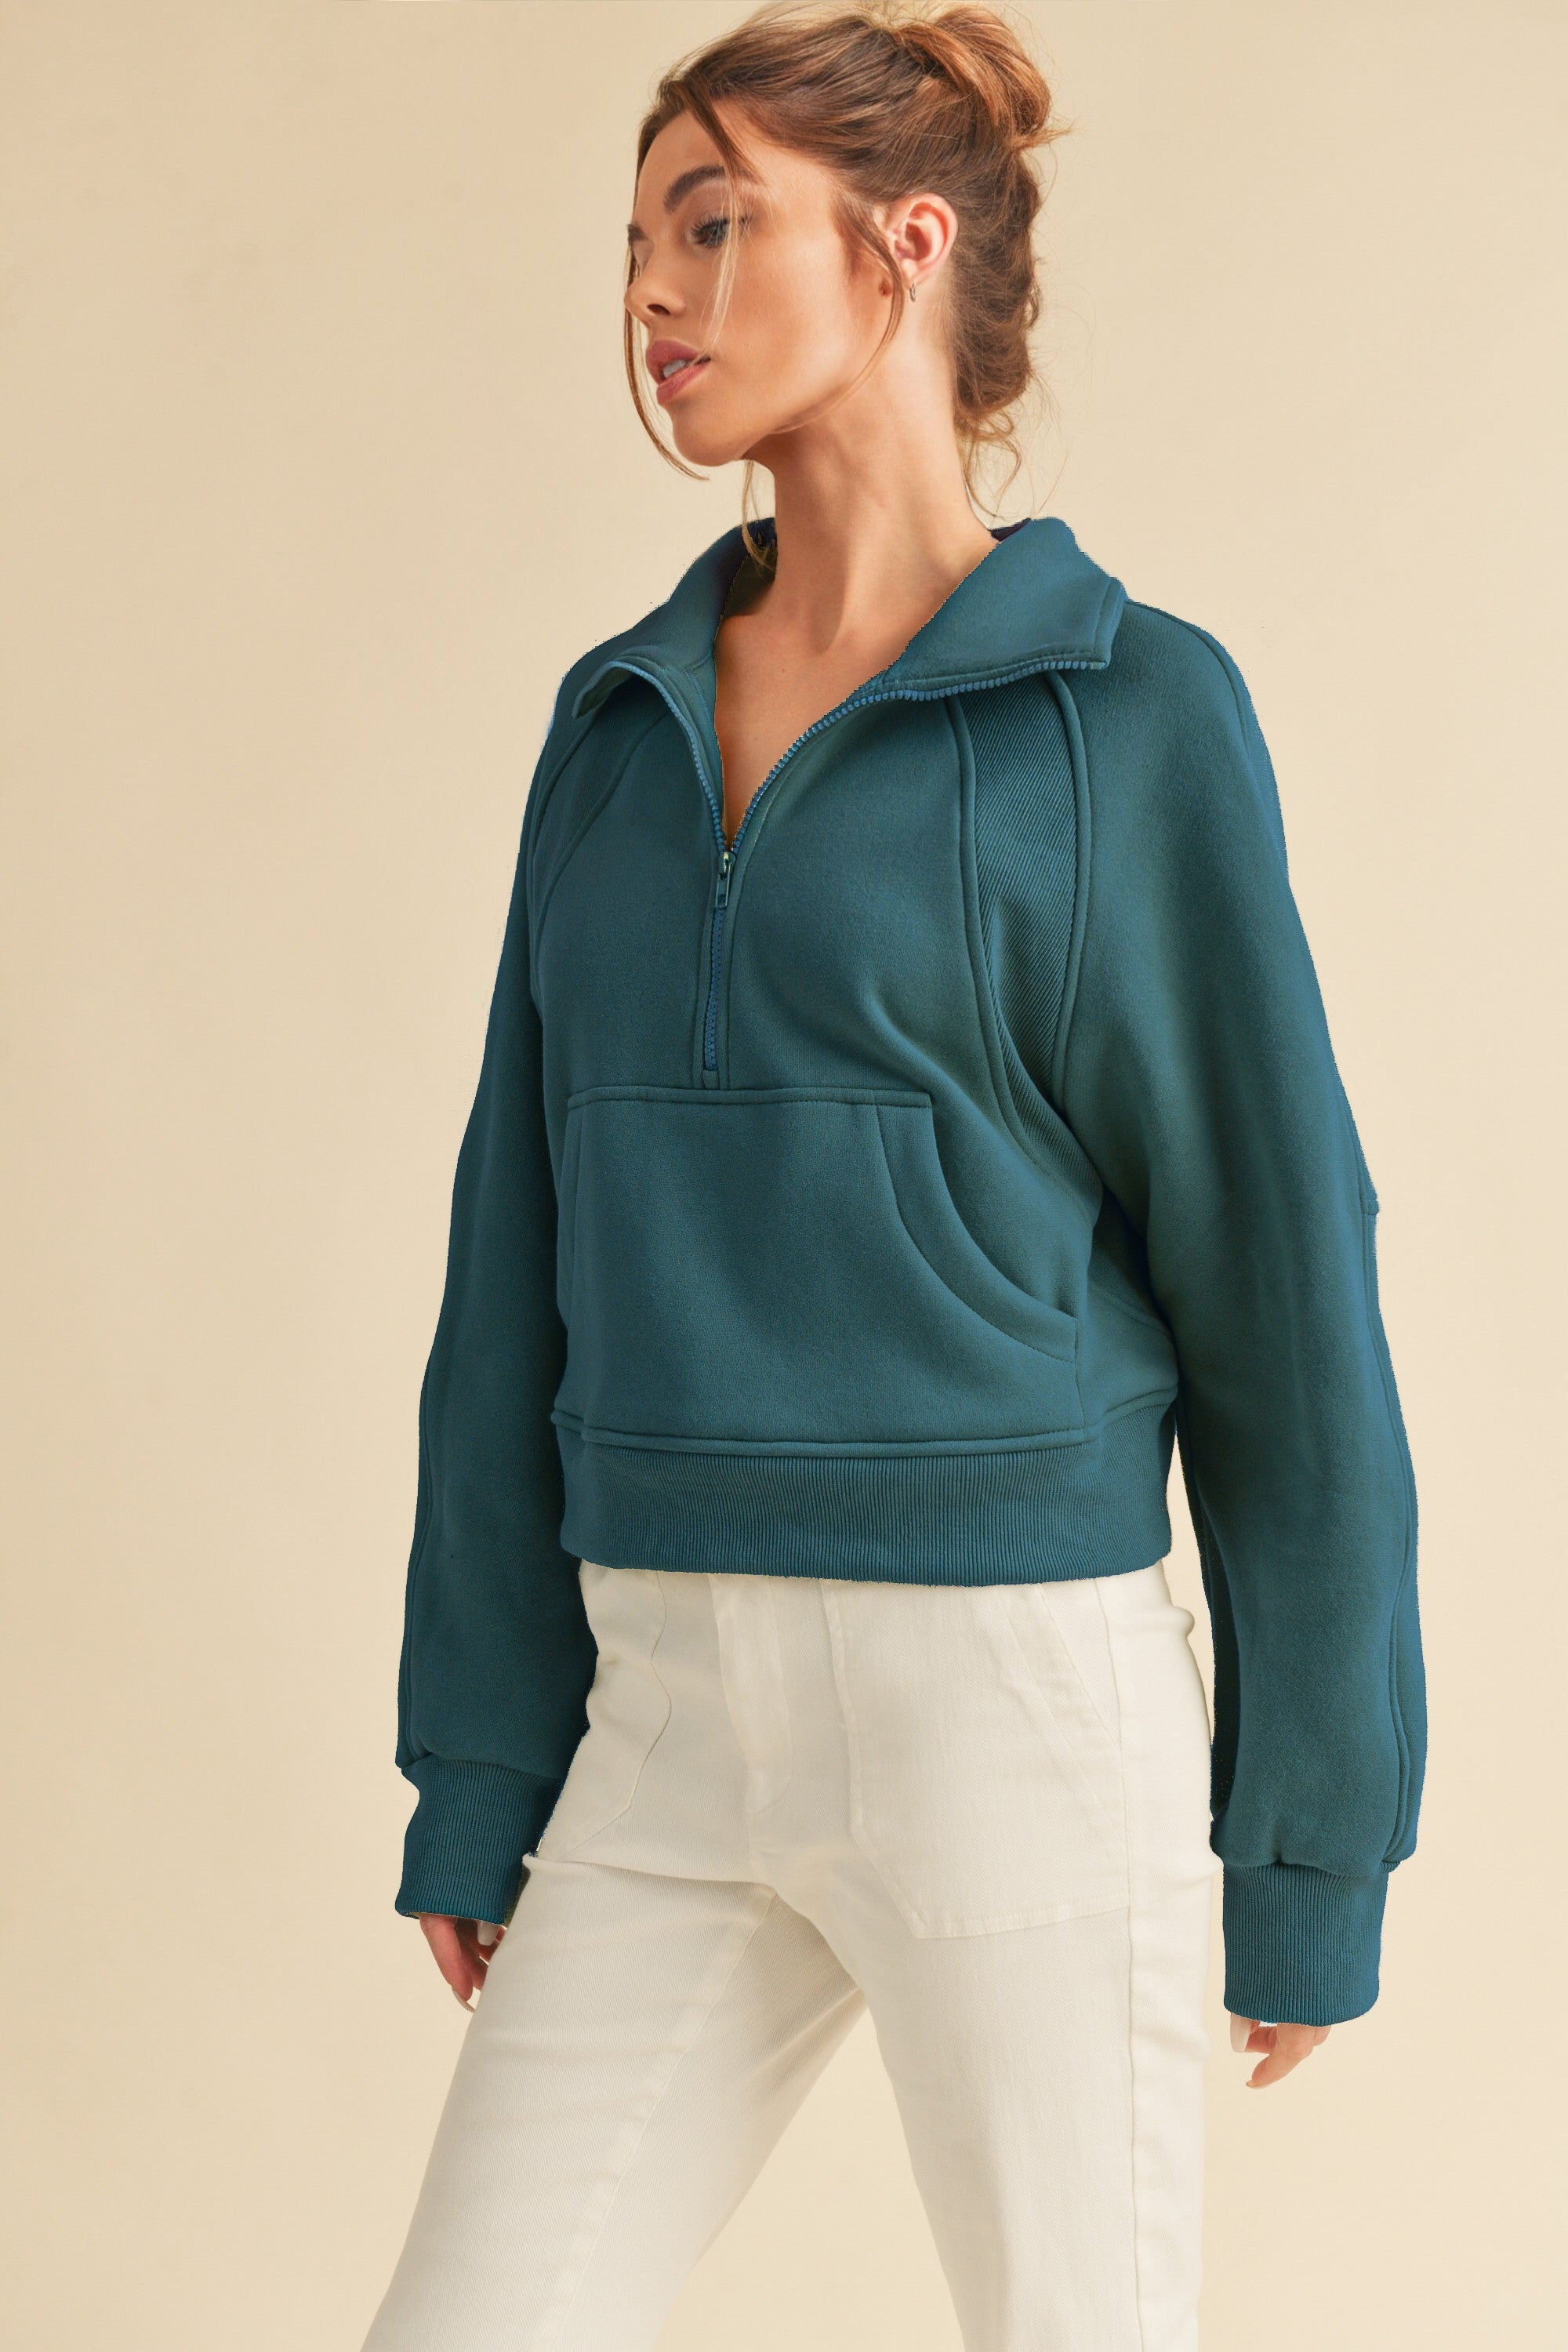 Aemi Dove 1/2 Zip Funnel Neck Sweater - Teal Clothing - Tops - Sweaters - Pullovers - Heavy Knit Pullovers by Aemi | Grace the Boutique